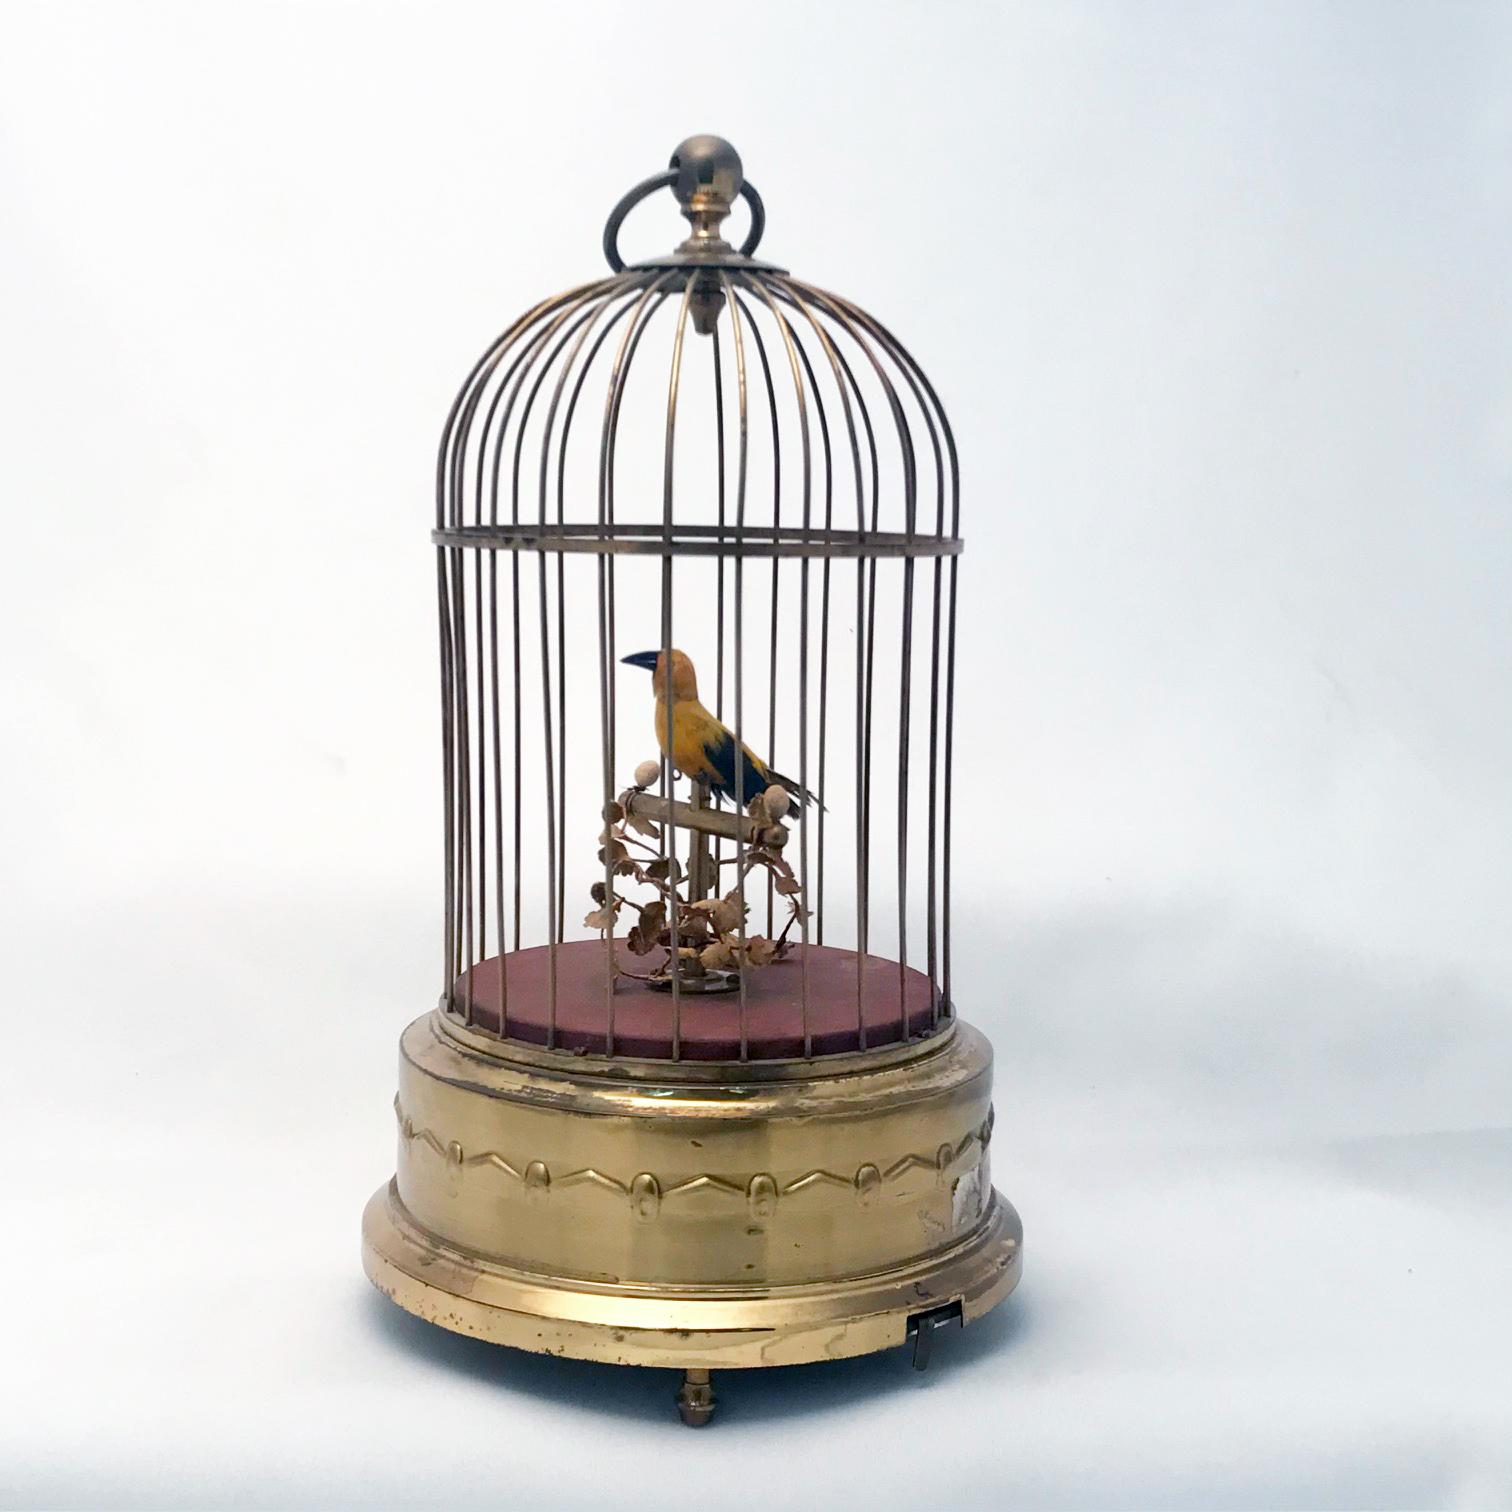 This bird is mainly yellow but with black wings, beak and tail feathers so is perhaps a canary. It cheeps tunefully and turns while doing so. The model retains its original leafy foliage, perch and brown ground. The brass cage is of the typical form